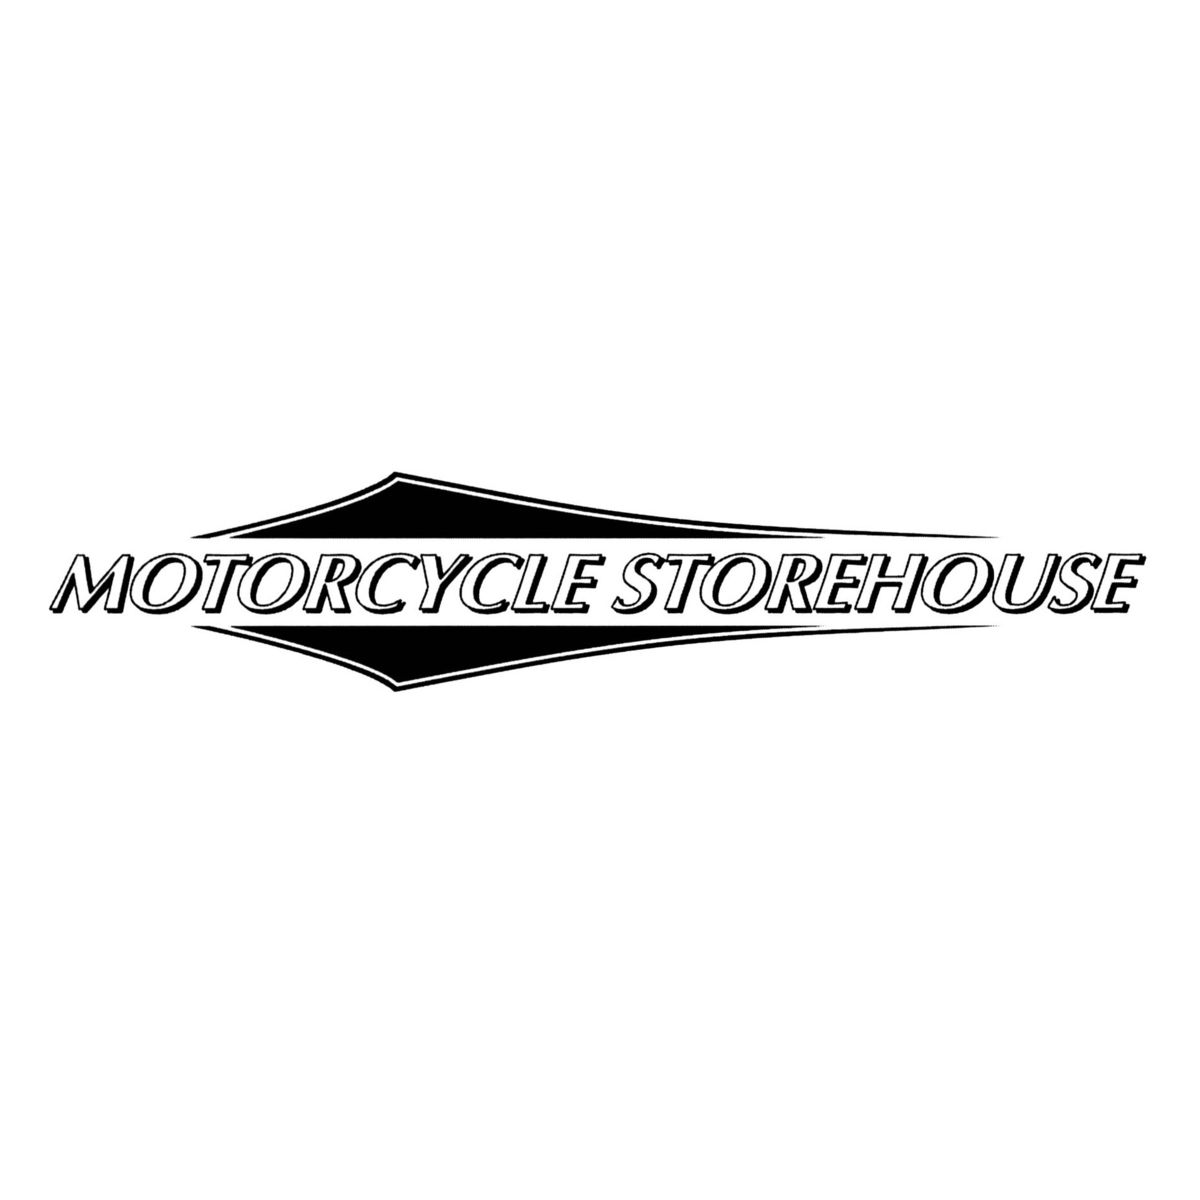 Motorcycles Storehouse